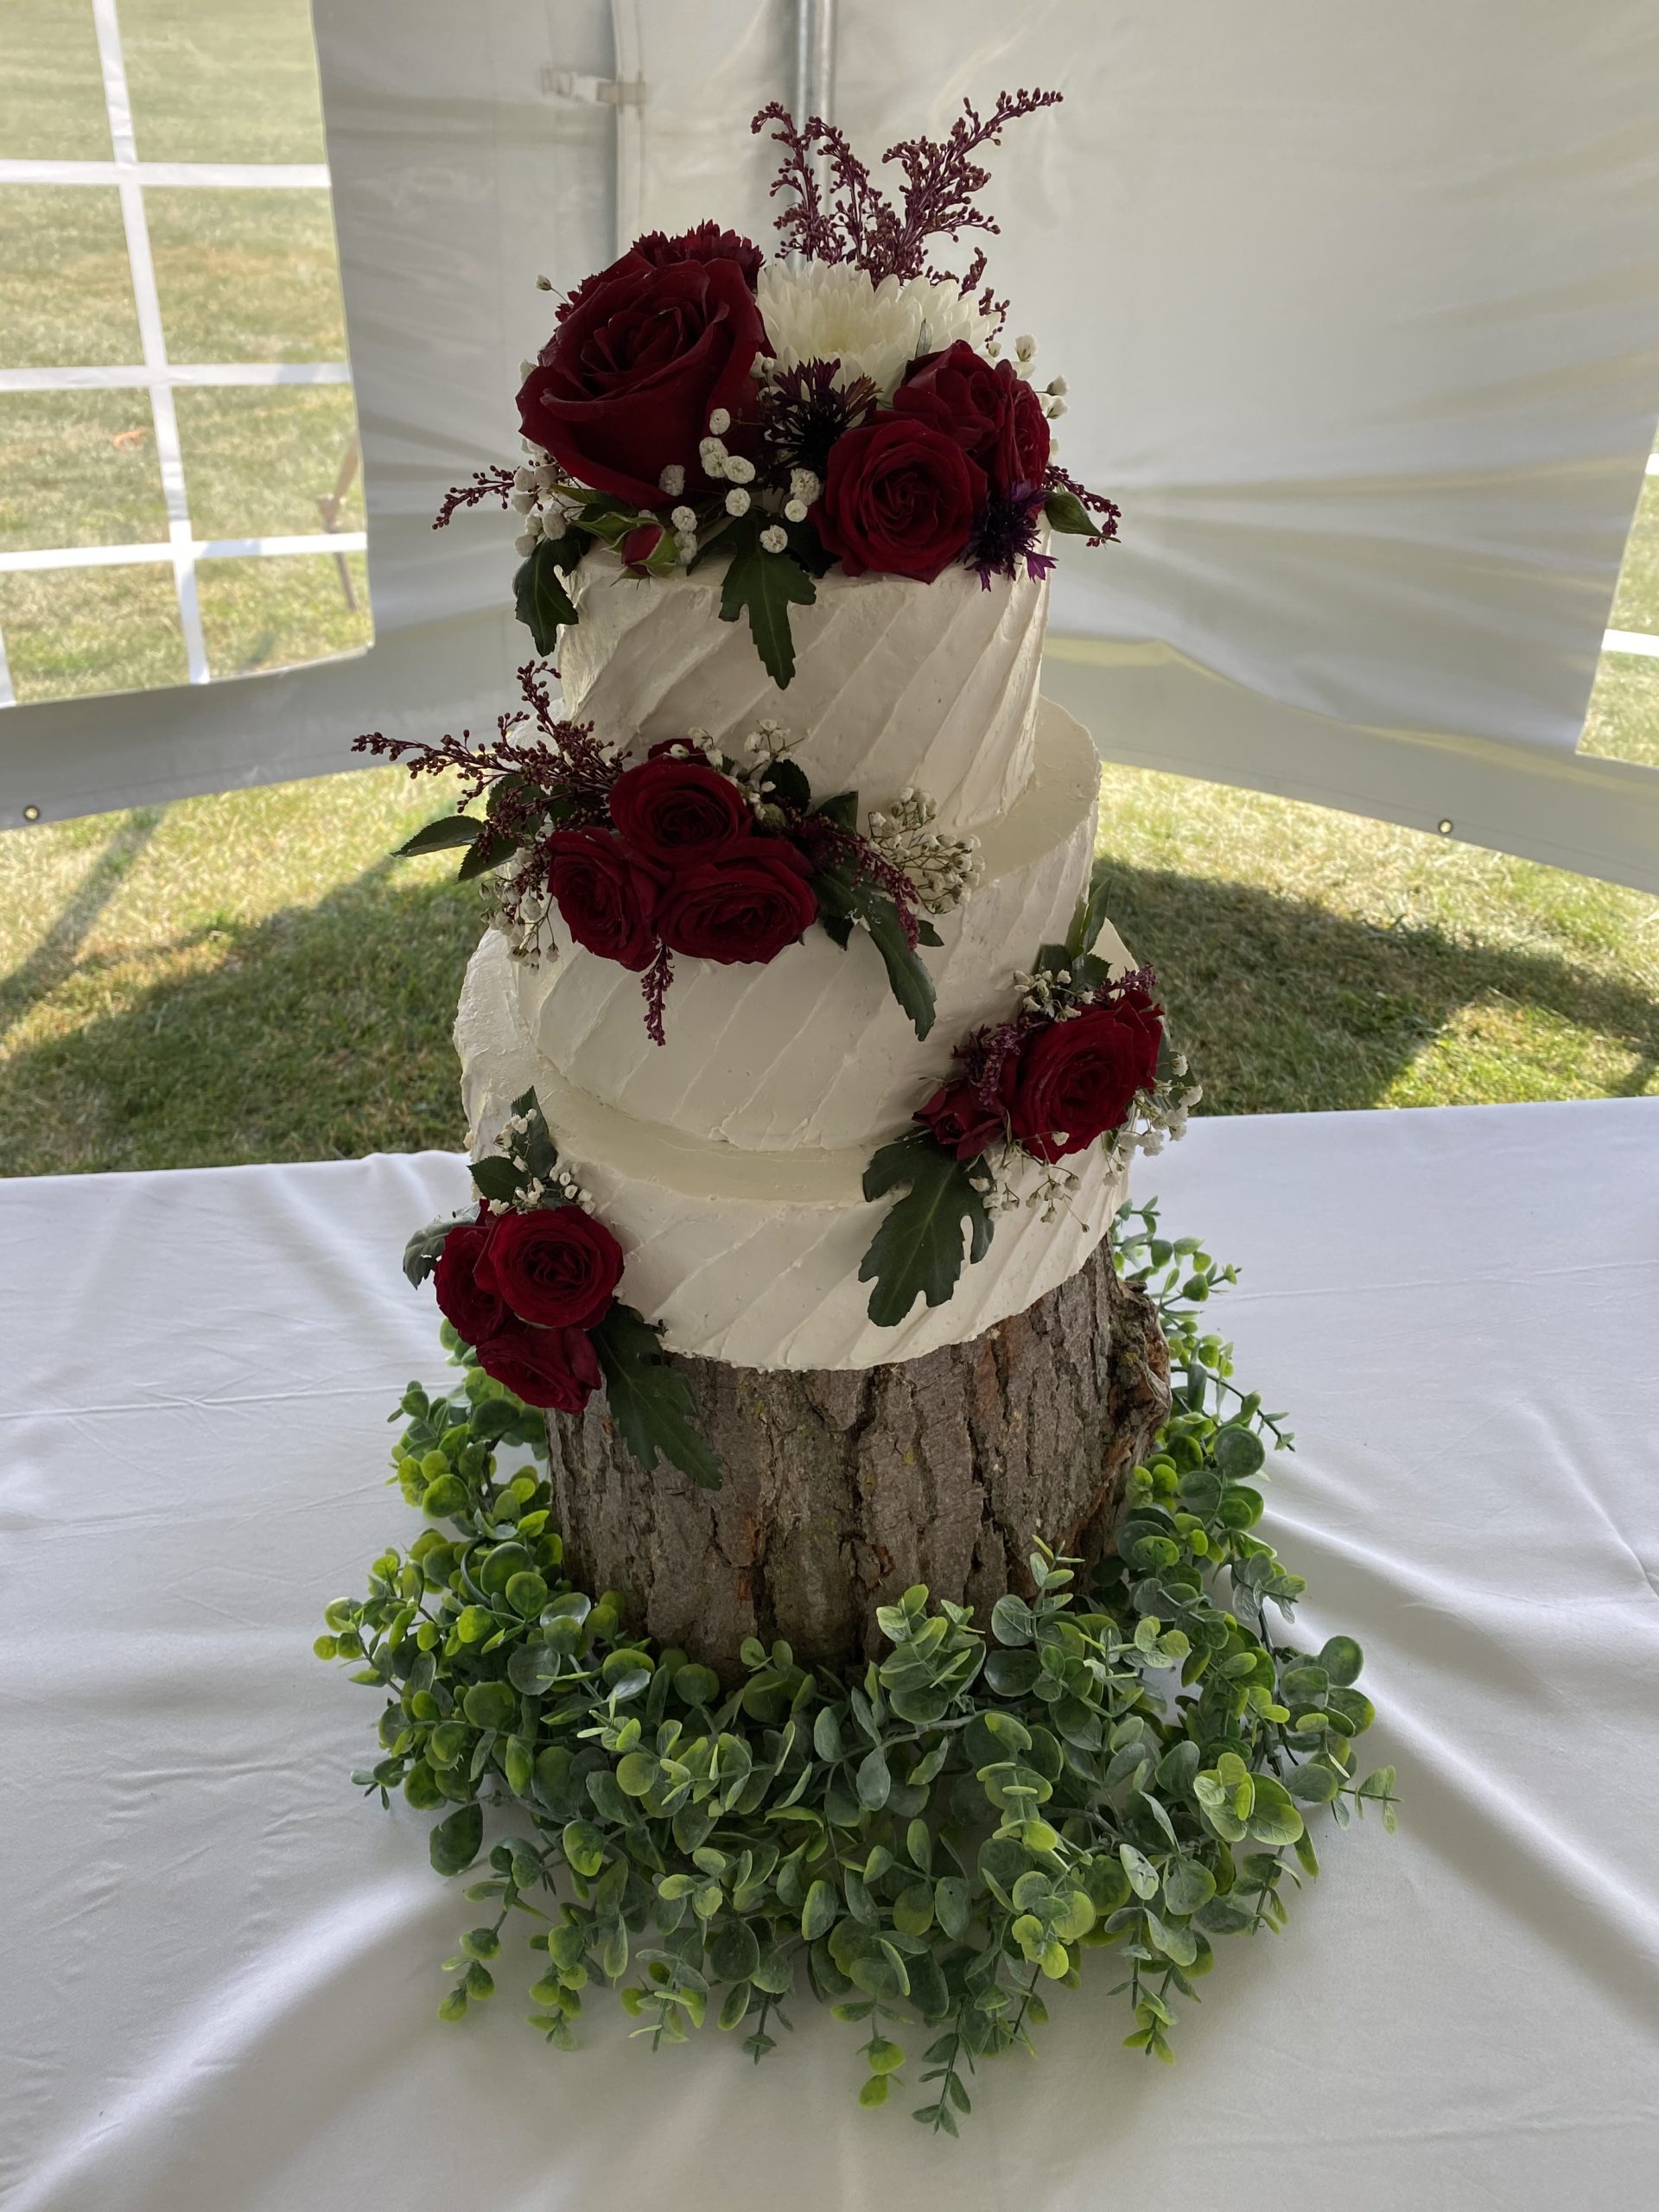 A beautiful 3-tier custom wedding cake with diagonal texture and live flowers from Village Patisserie in Toledo, Ohio